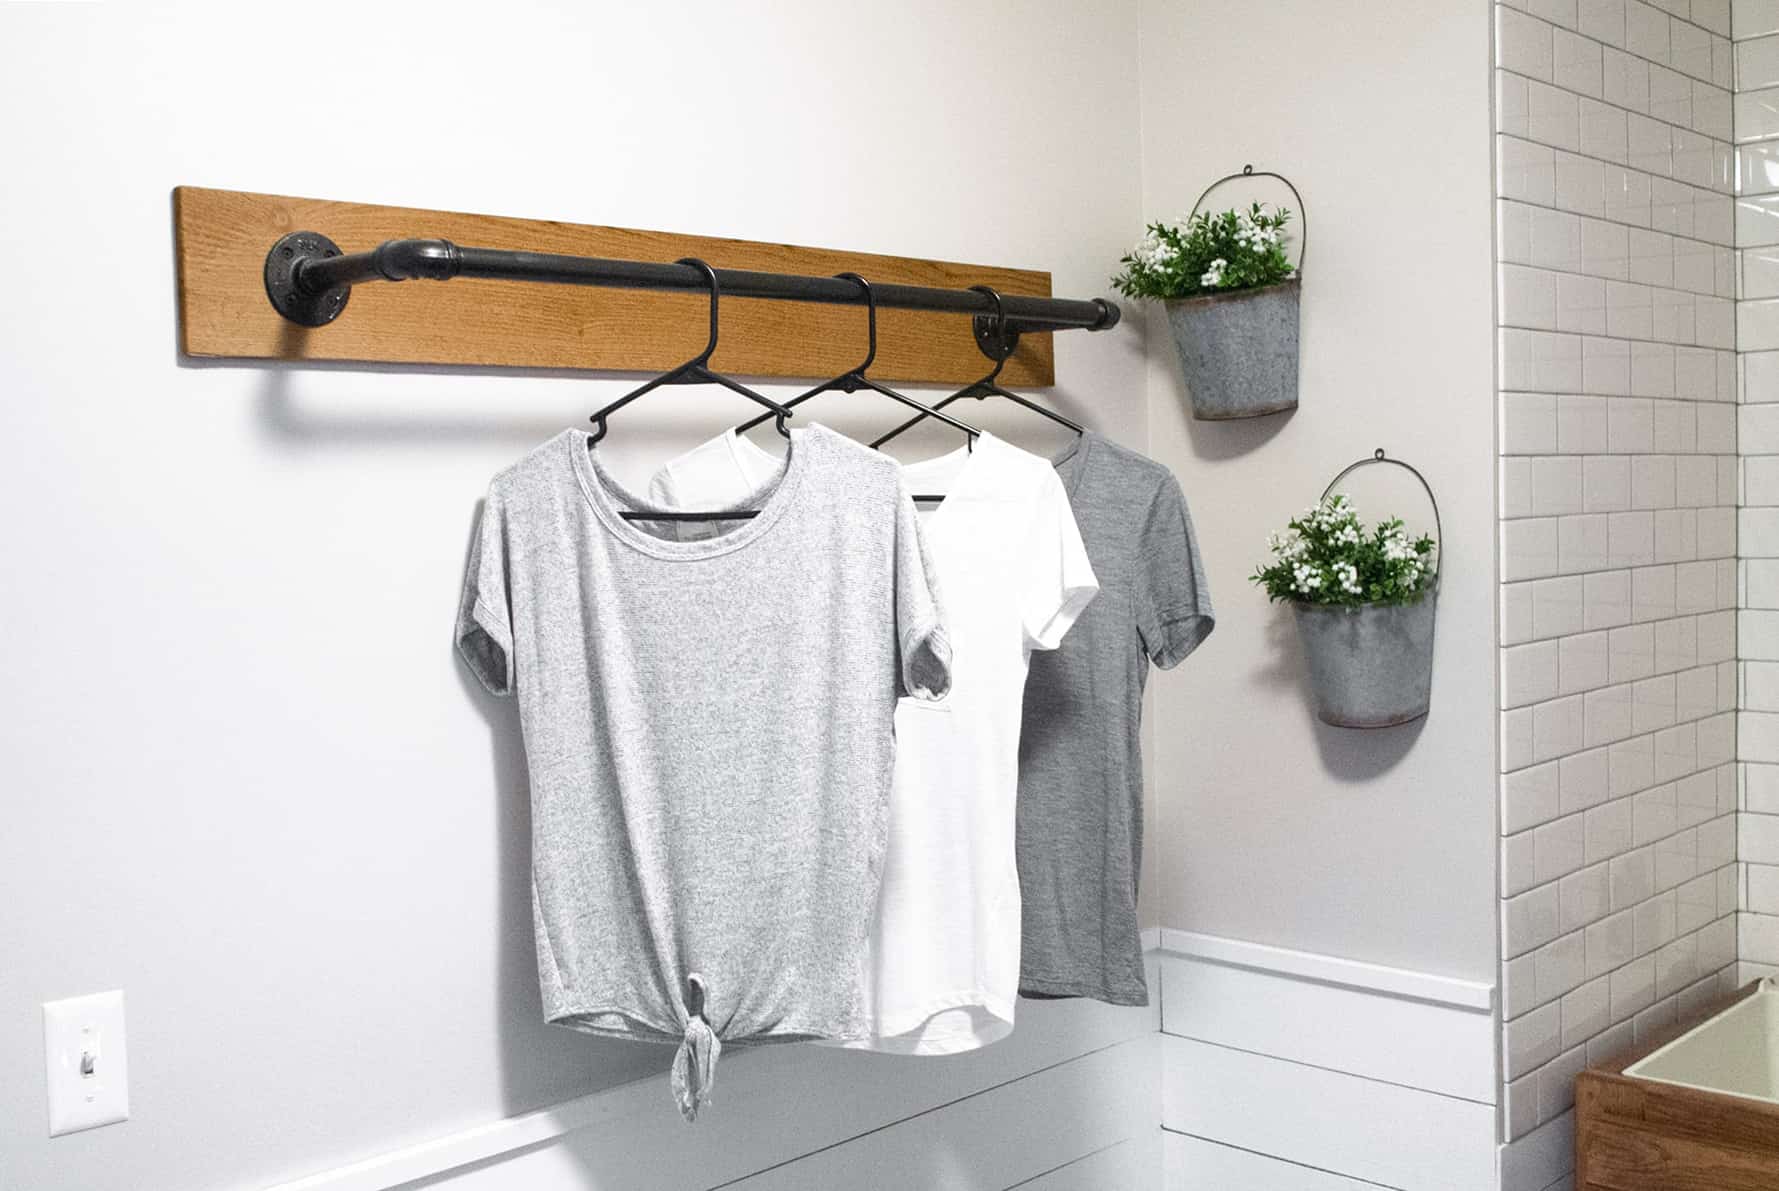 DIY Wall Mounted Clothing Rack – Sammy On State